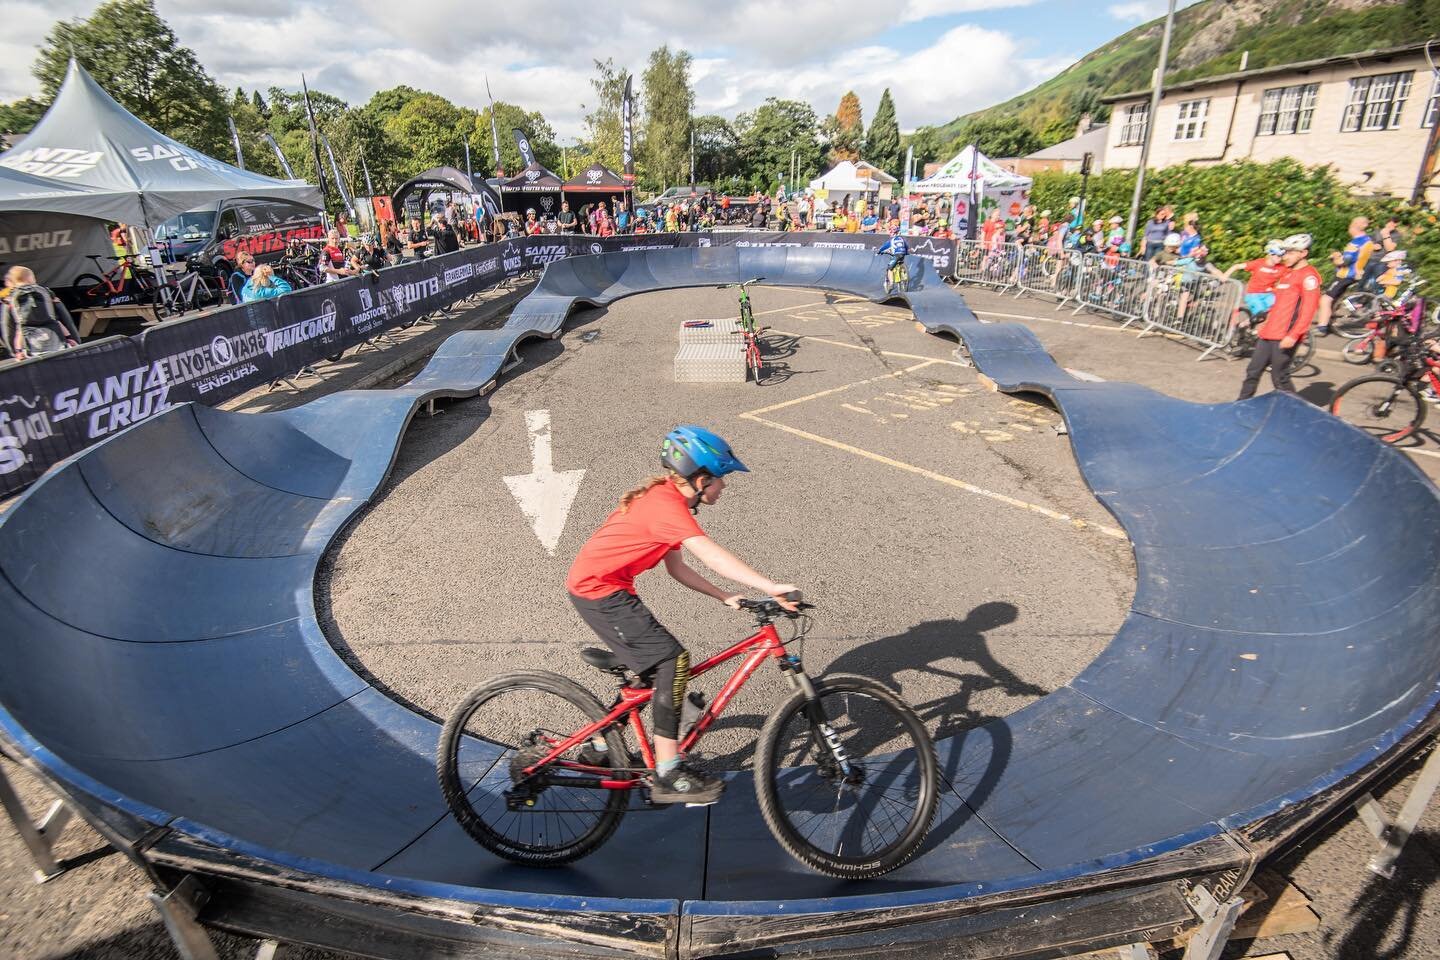 Dukes Weekender is putting on an absolute spread for the sprogs this year whether racing or not and we love the family vibe! 

✅ Kids Enduro 
✅ Dukes half (14-18yrs) 
✅ Pumptrack 
✅ Demo Bikes 
✅ Trailcoach sessions, competitions and prizes 
✅ Face P